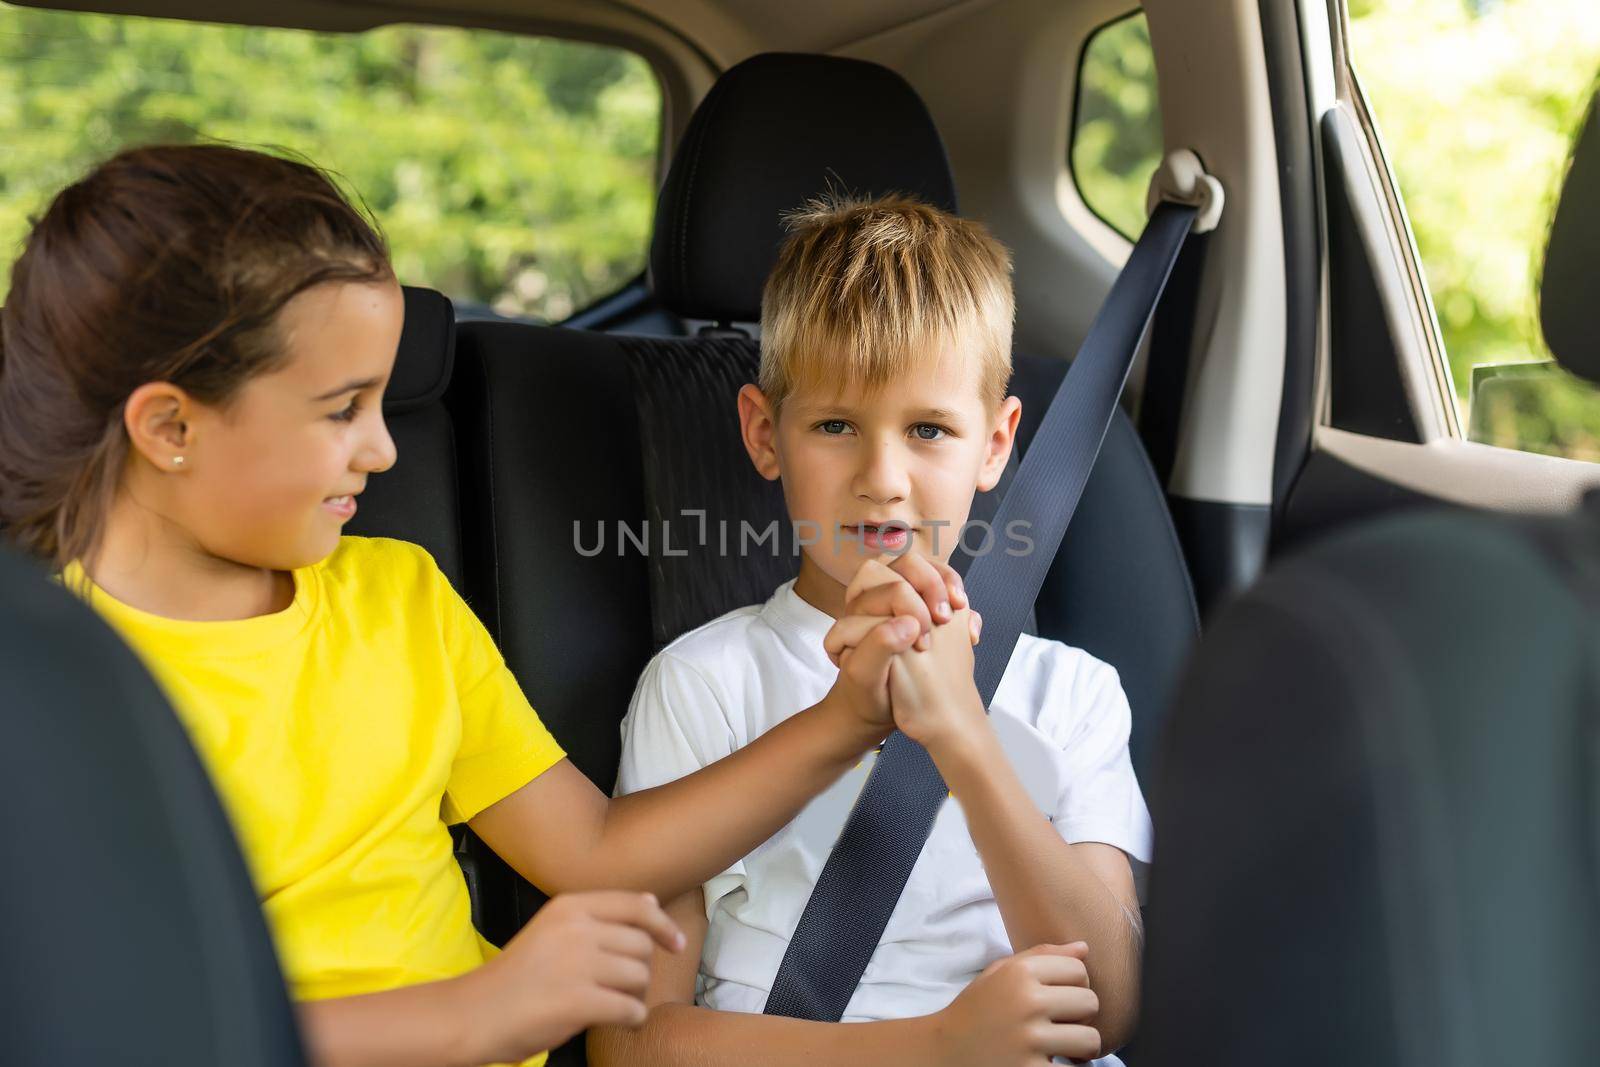 Happy kids, adorable toddler girl with teenager brother sitting together in modern car locked with safety belts enjoying family vacation trip on summer weekend.